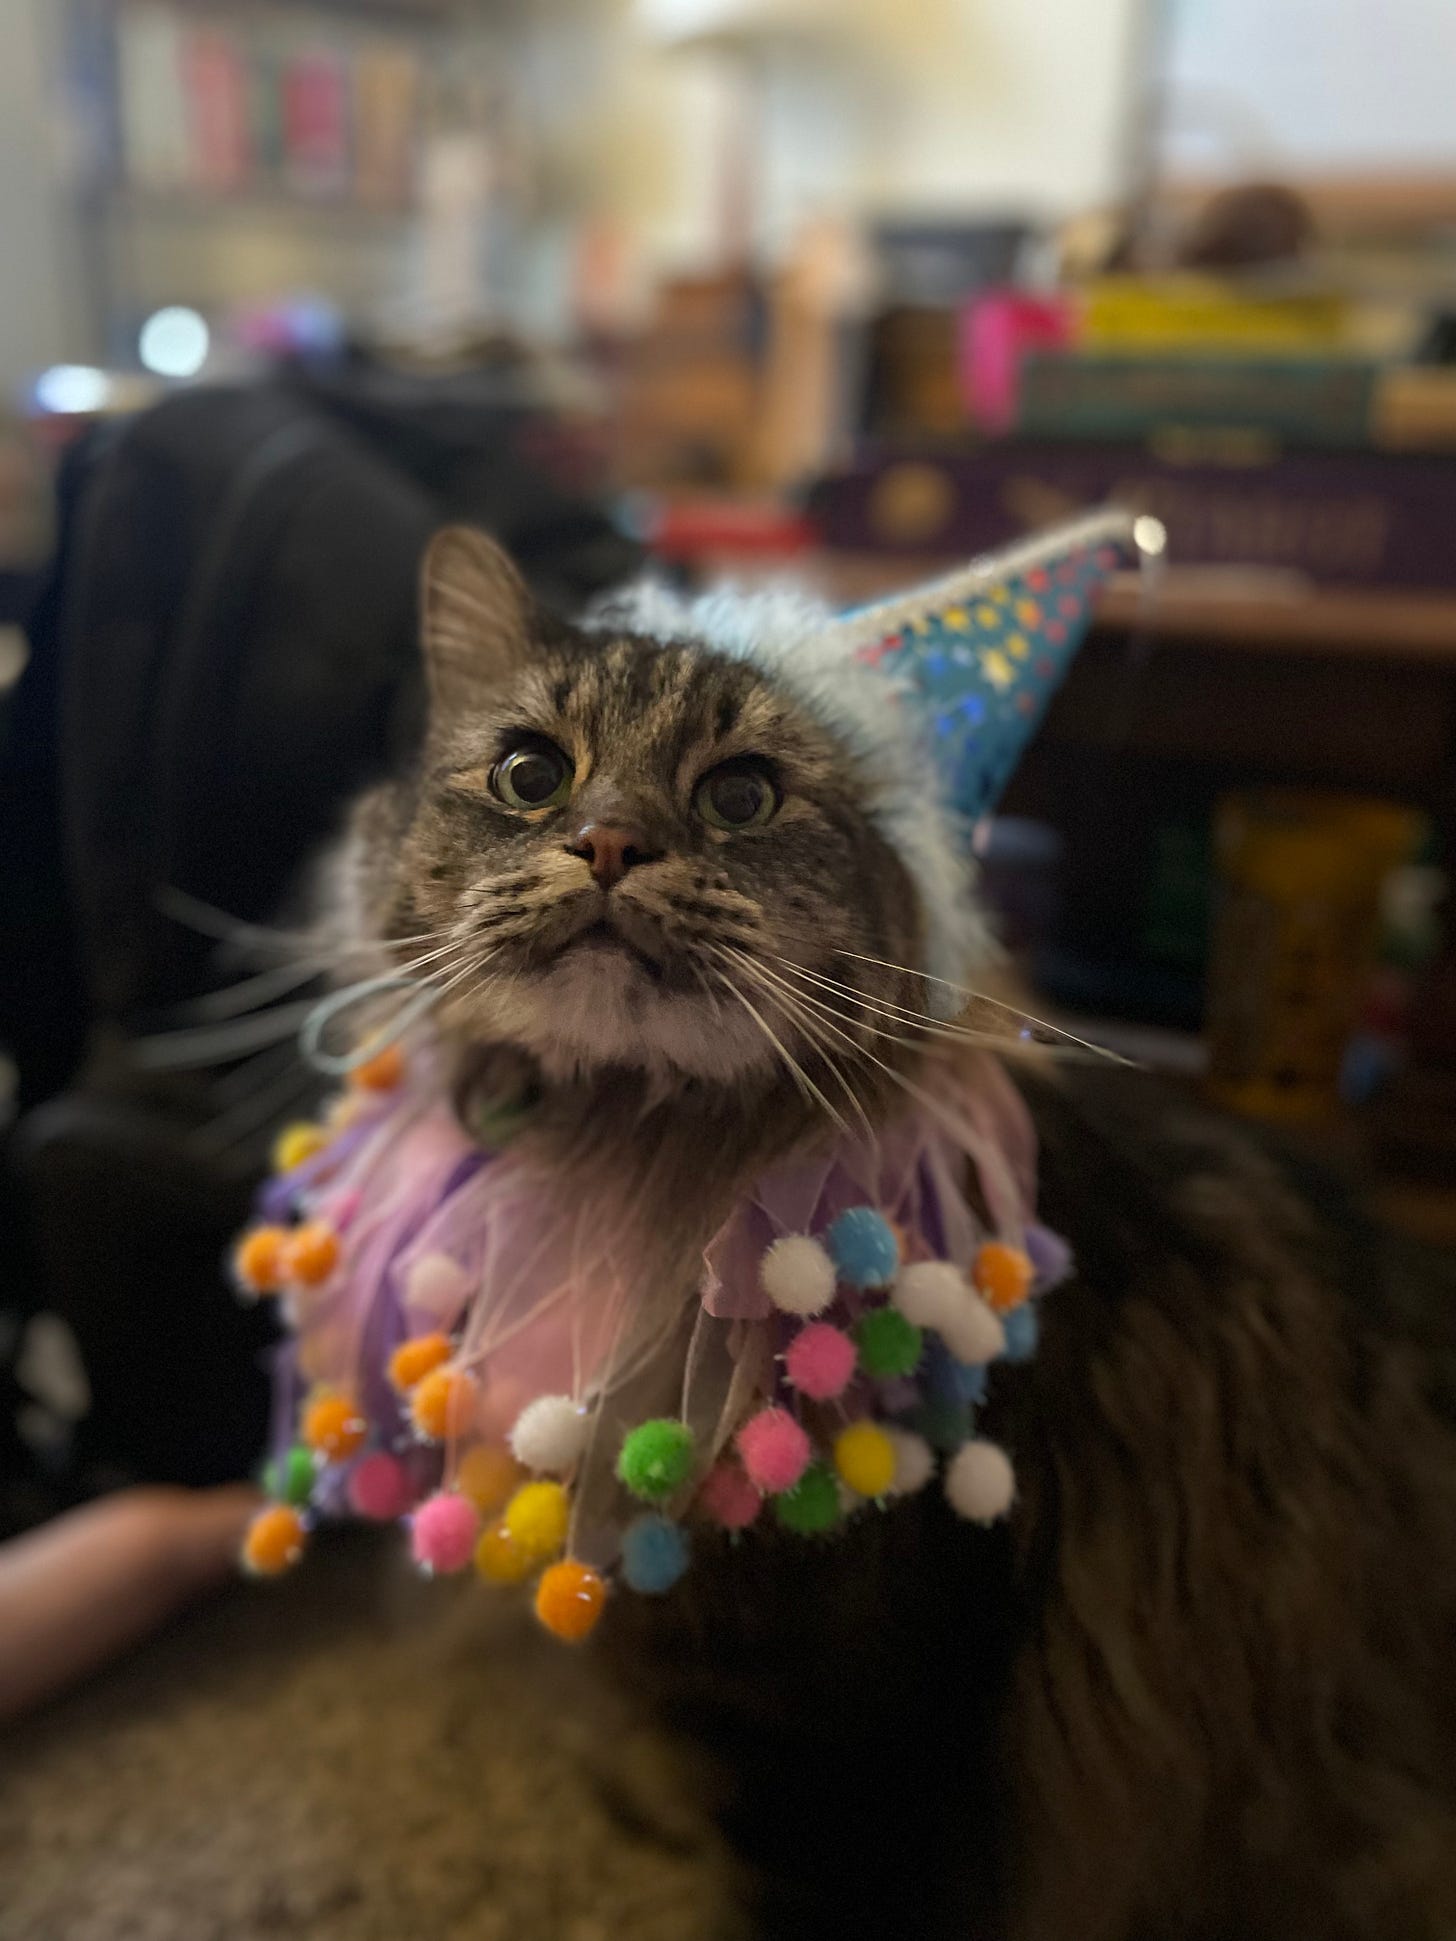 James, a brown tabby Maine Coon, seen here in a birthday party hat and accompanying neck ruffle, in celebration of his tenth birthday.